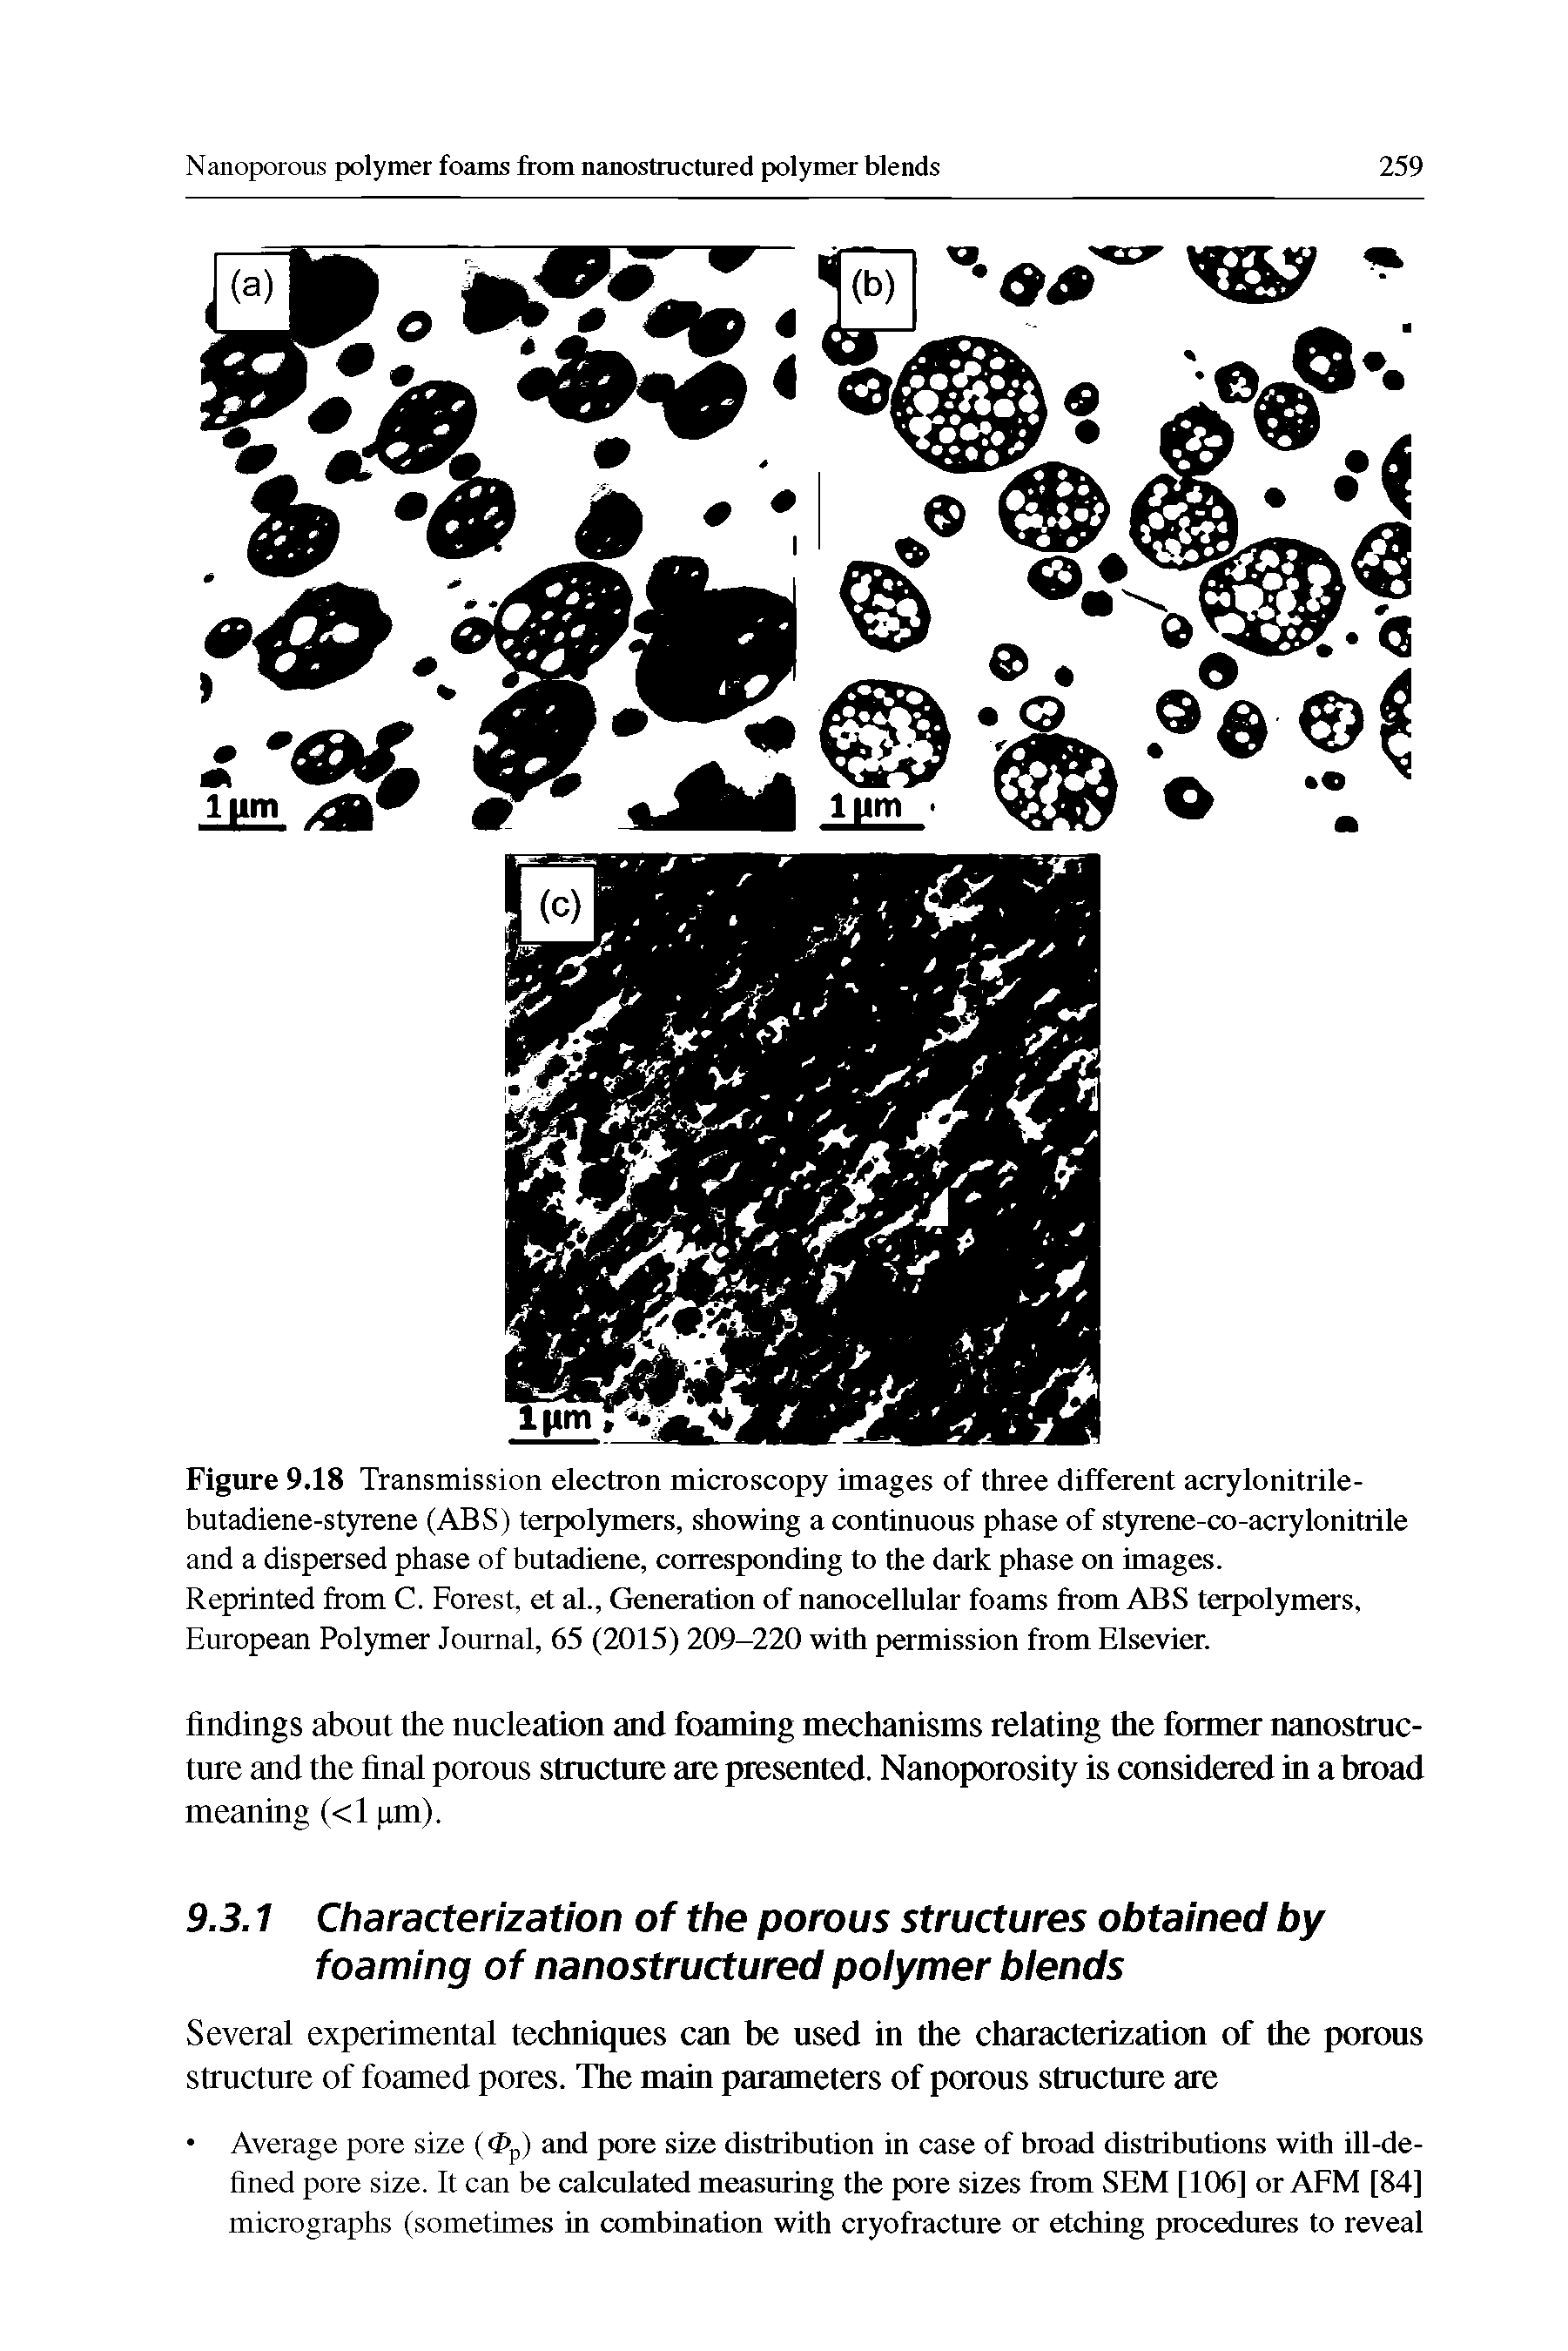 Figure 9.18 Transmission electron microscopy images of three different acrylonitrile-butadiene-styrene (ABS) terpolymers, showing a continuous phase of styrene-co-acrylonitrile and a dispersed phase of butadiene, corresponding to the dark phase on images.